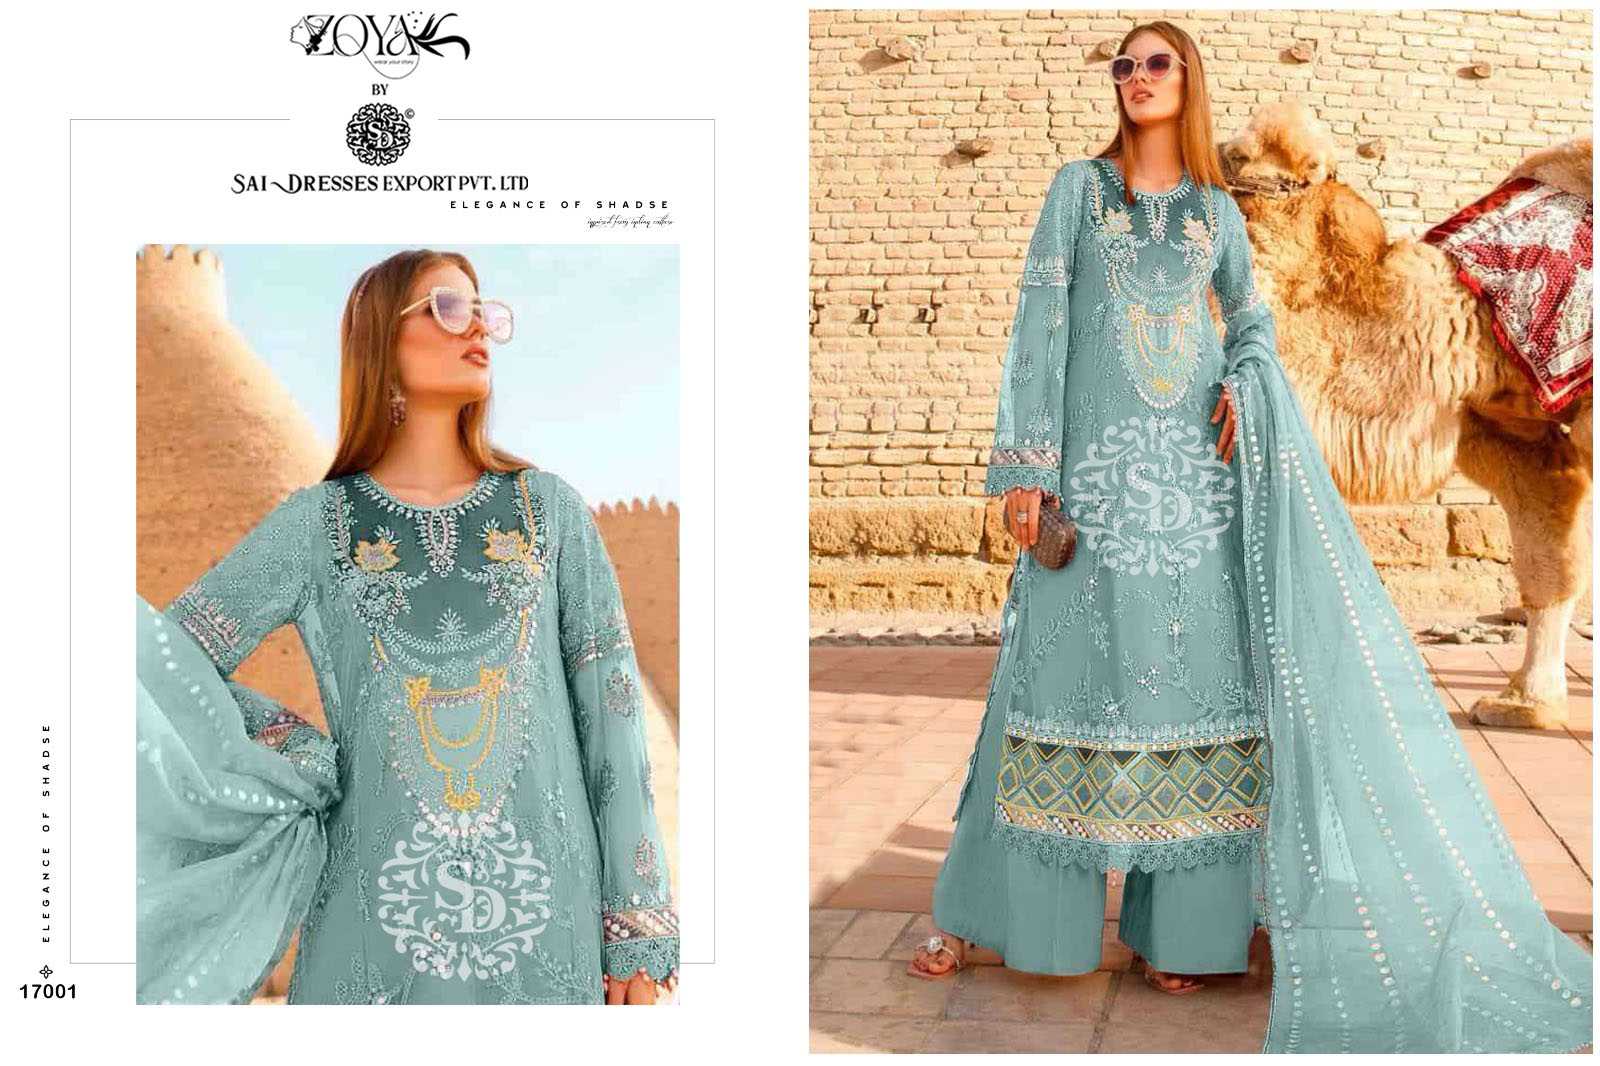 SAI DRESSES PRESENT EMAAN ADEEL PREMIUM COLLECTION VOL 17 PARTY WEAR SEMI STITCHED HEAVY PAKISTANI DESIGNER SUITS IN WHOLESALE RATE IN SURAT